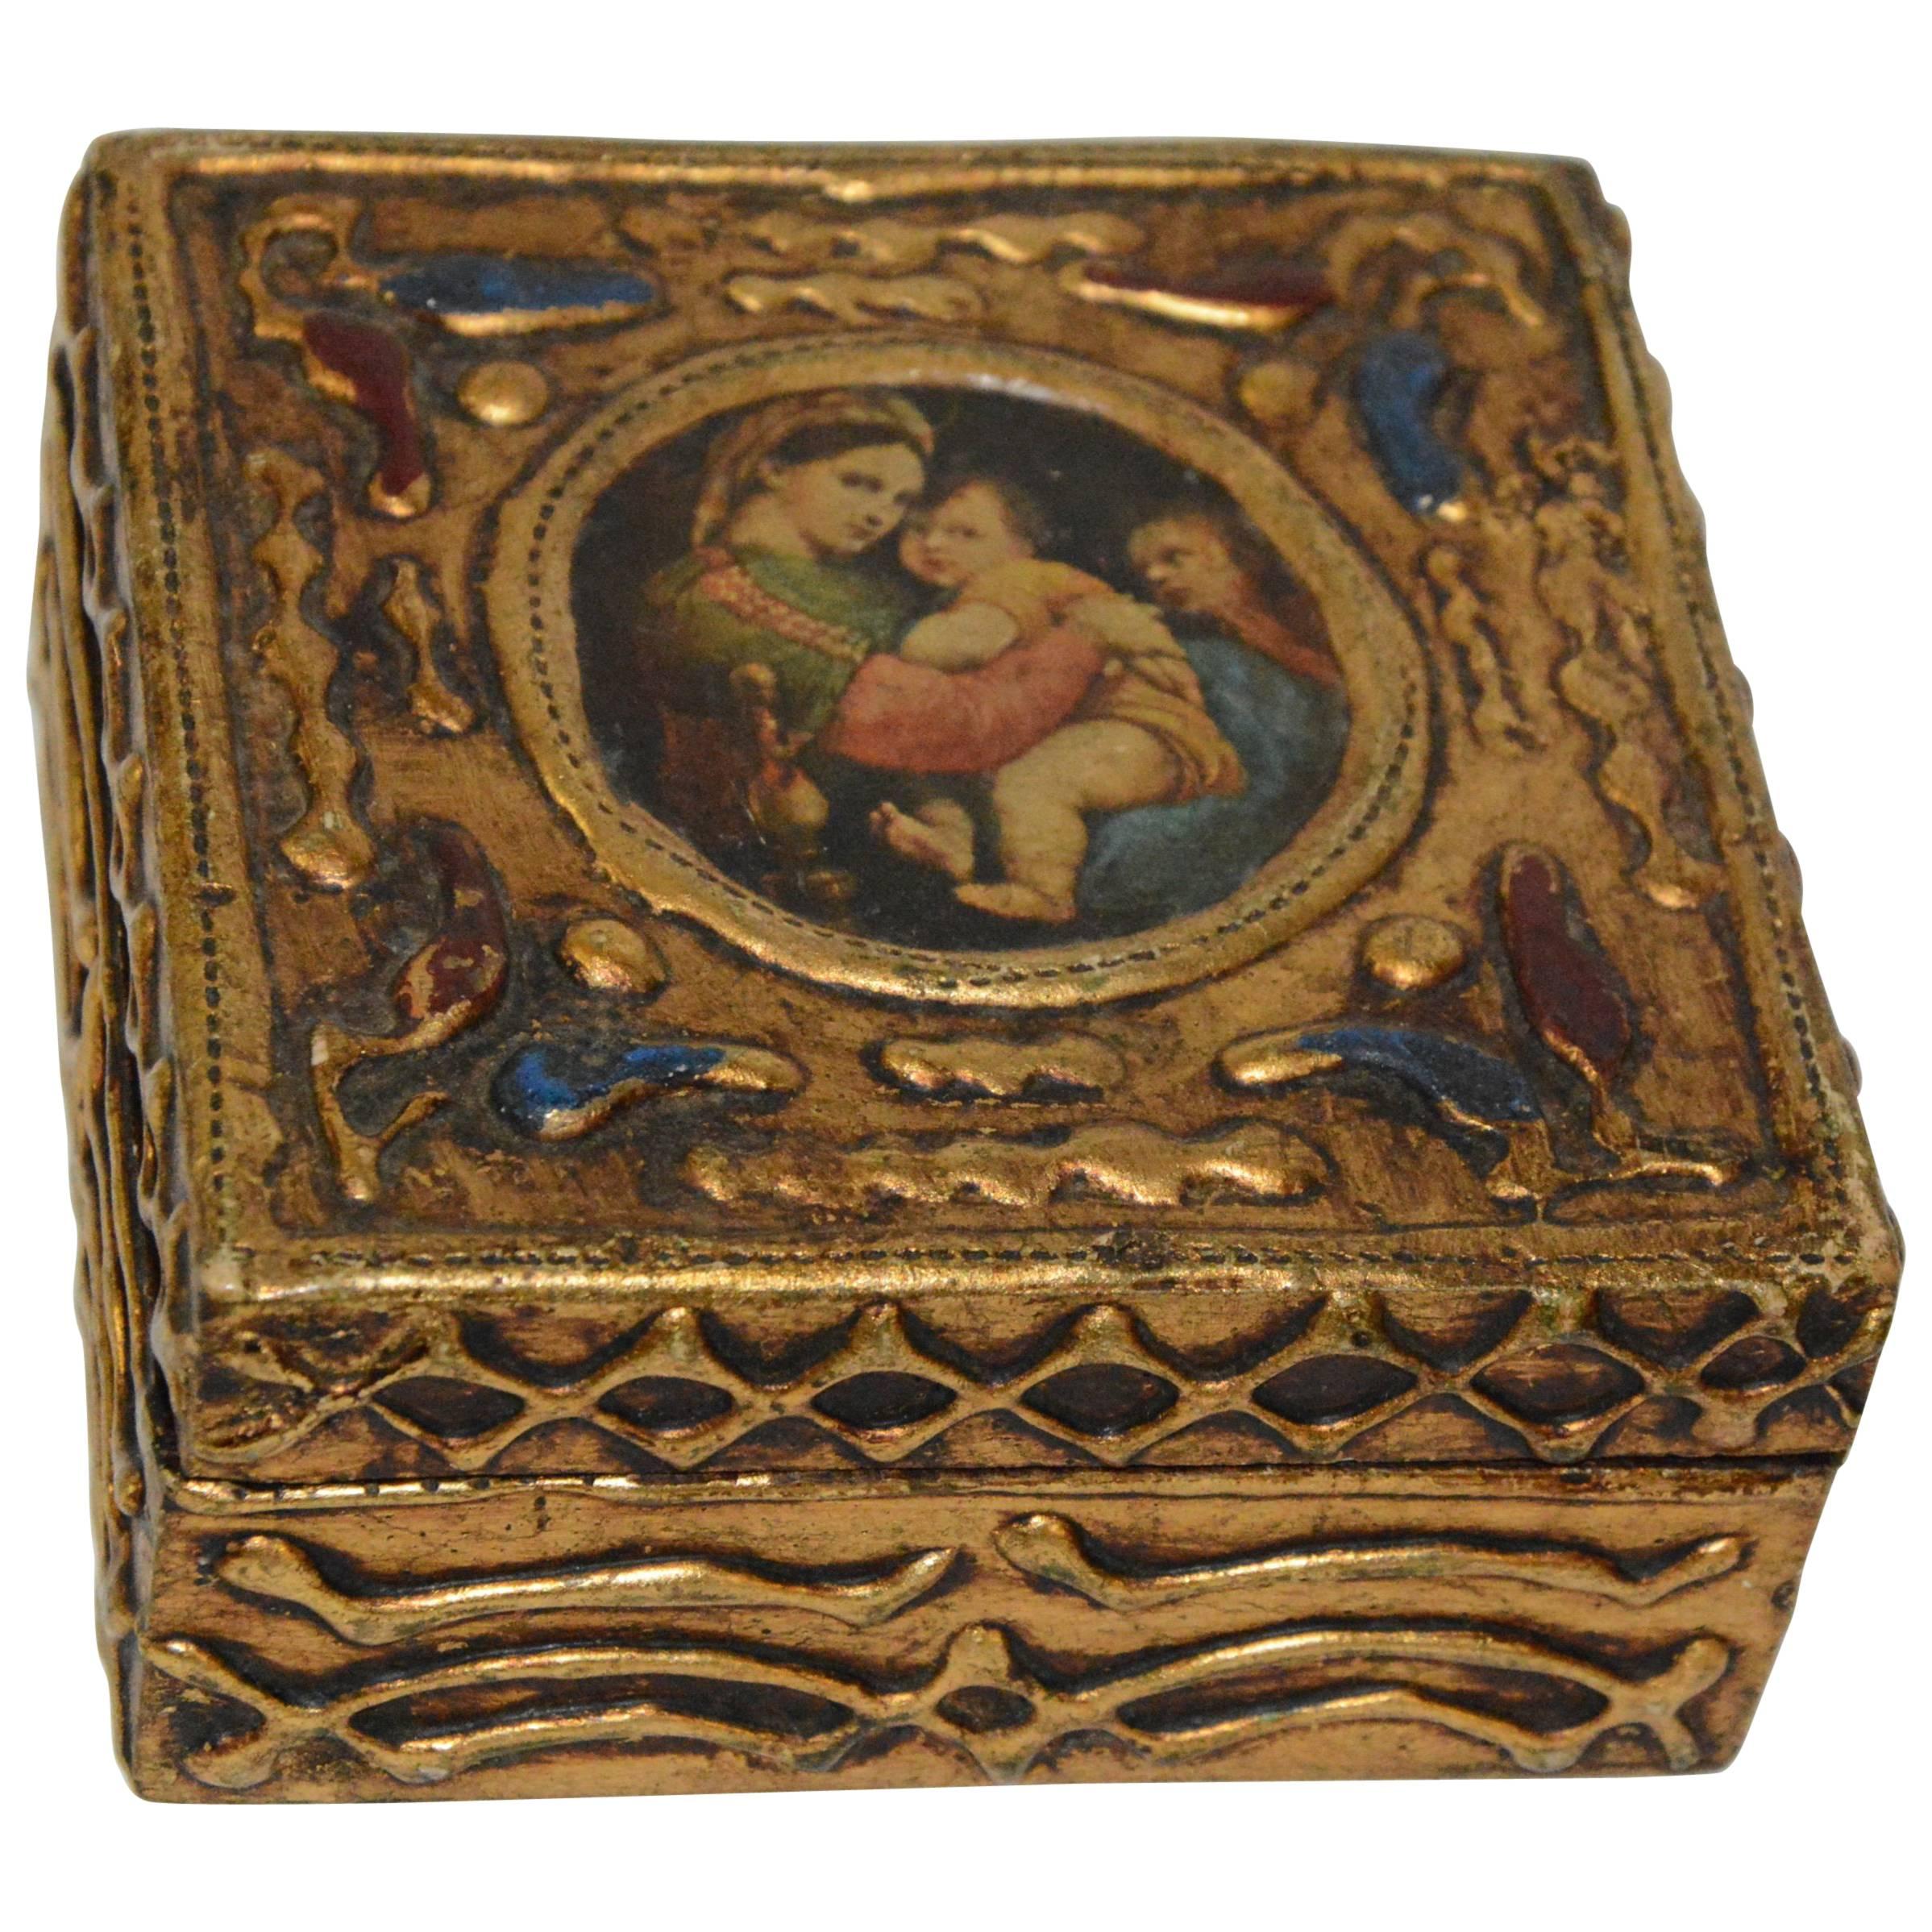 Florentine Box with Madonna and Child